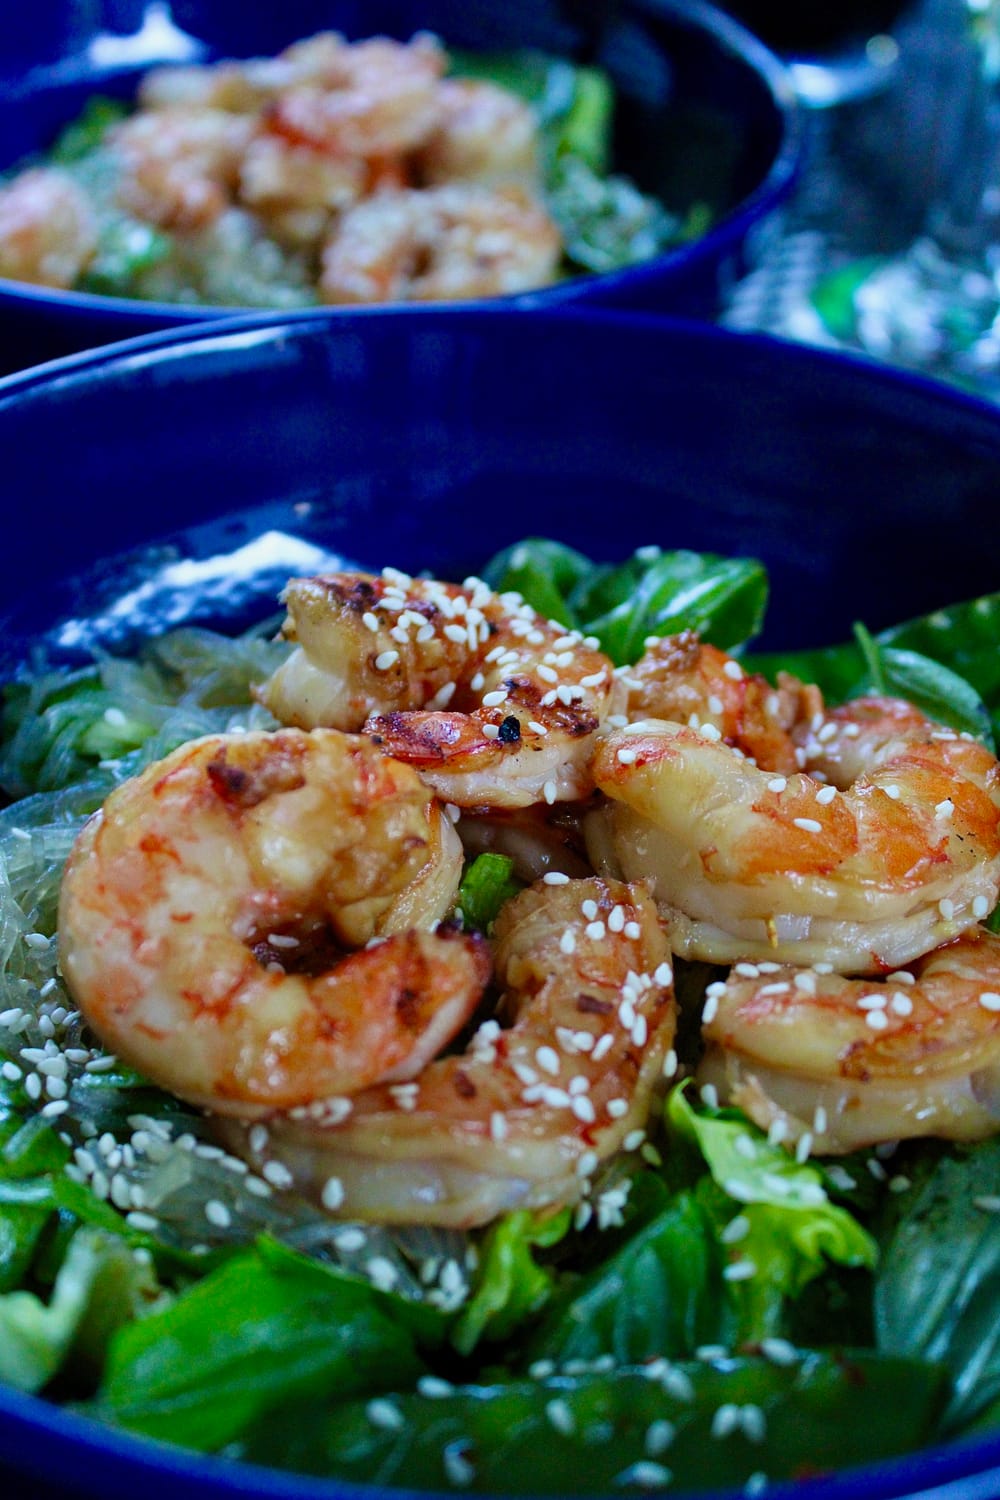 Spicy basil and grilled shrimp.